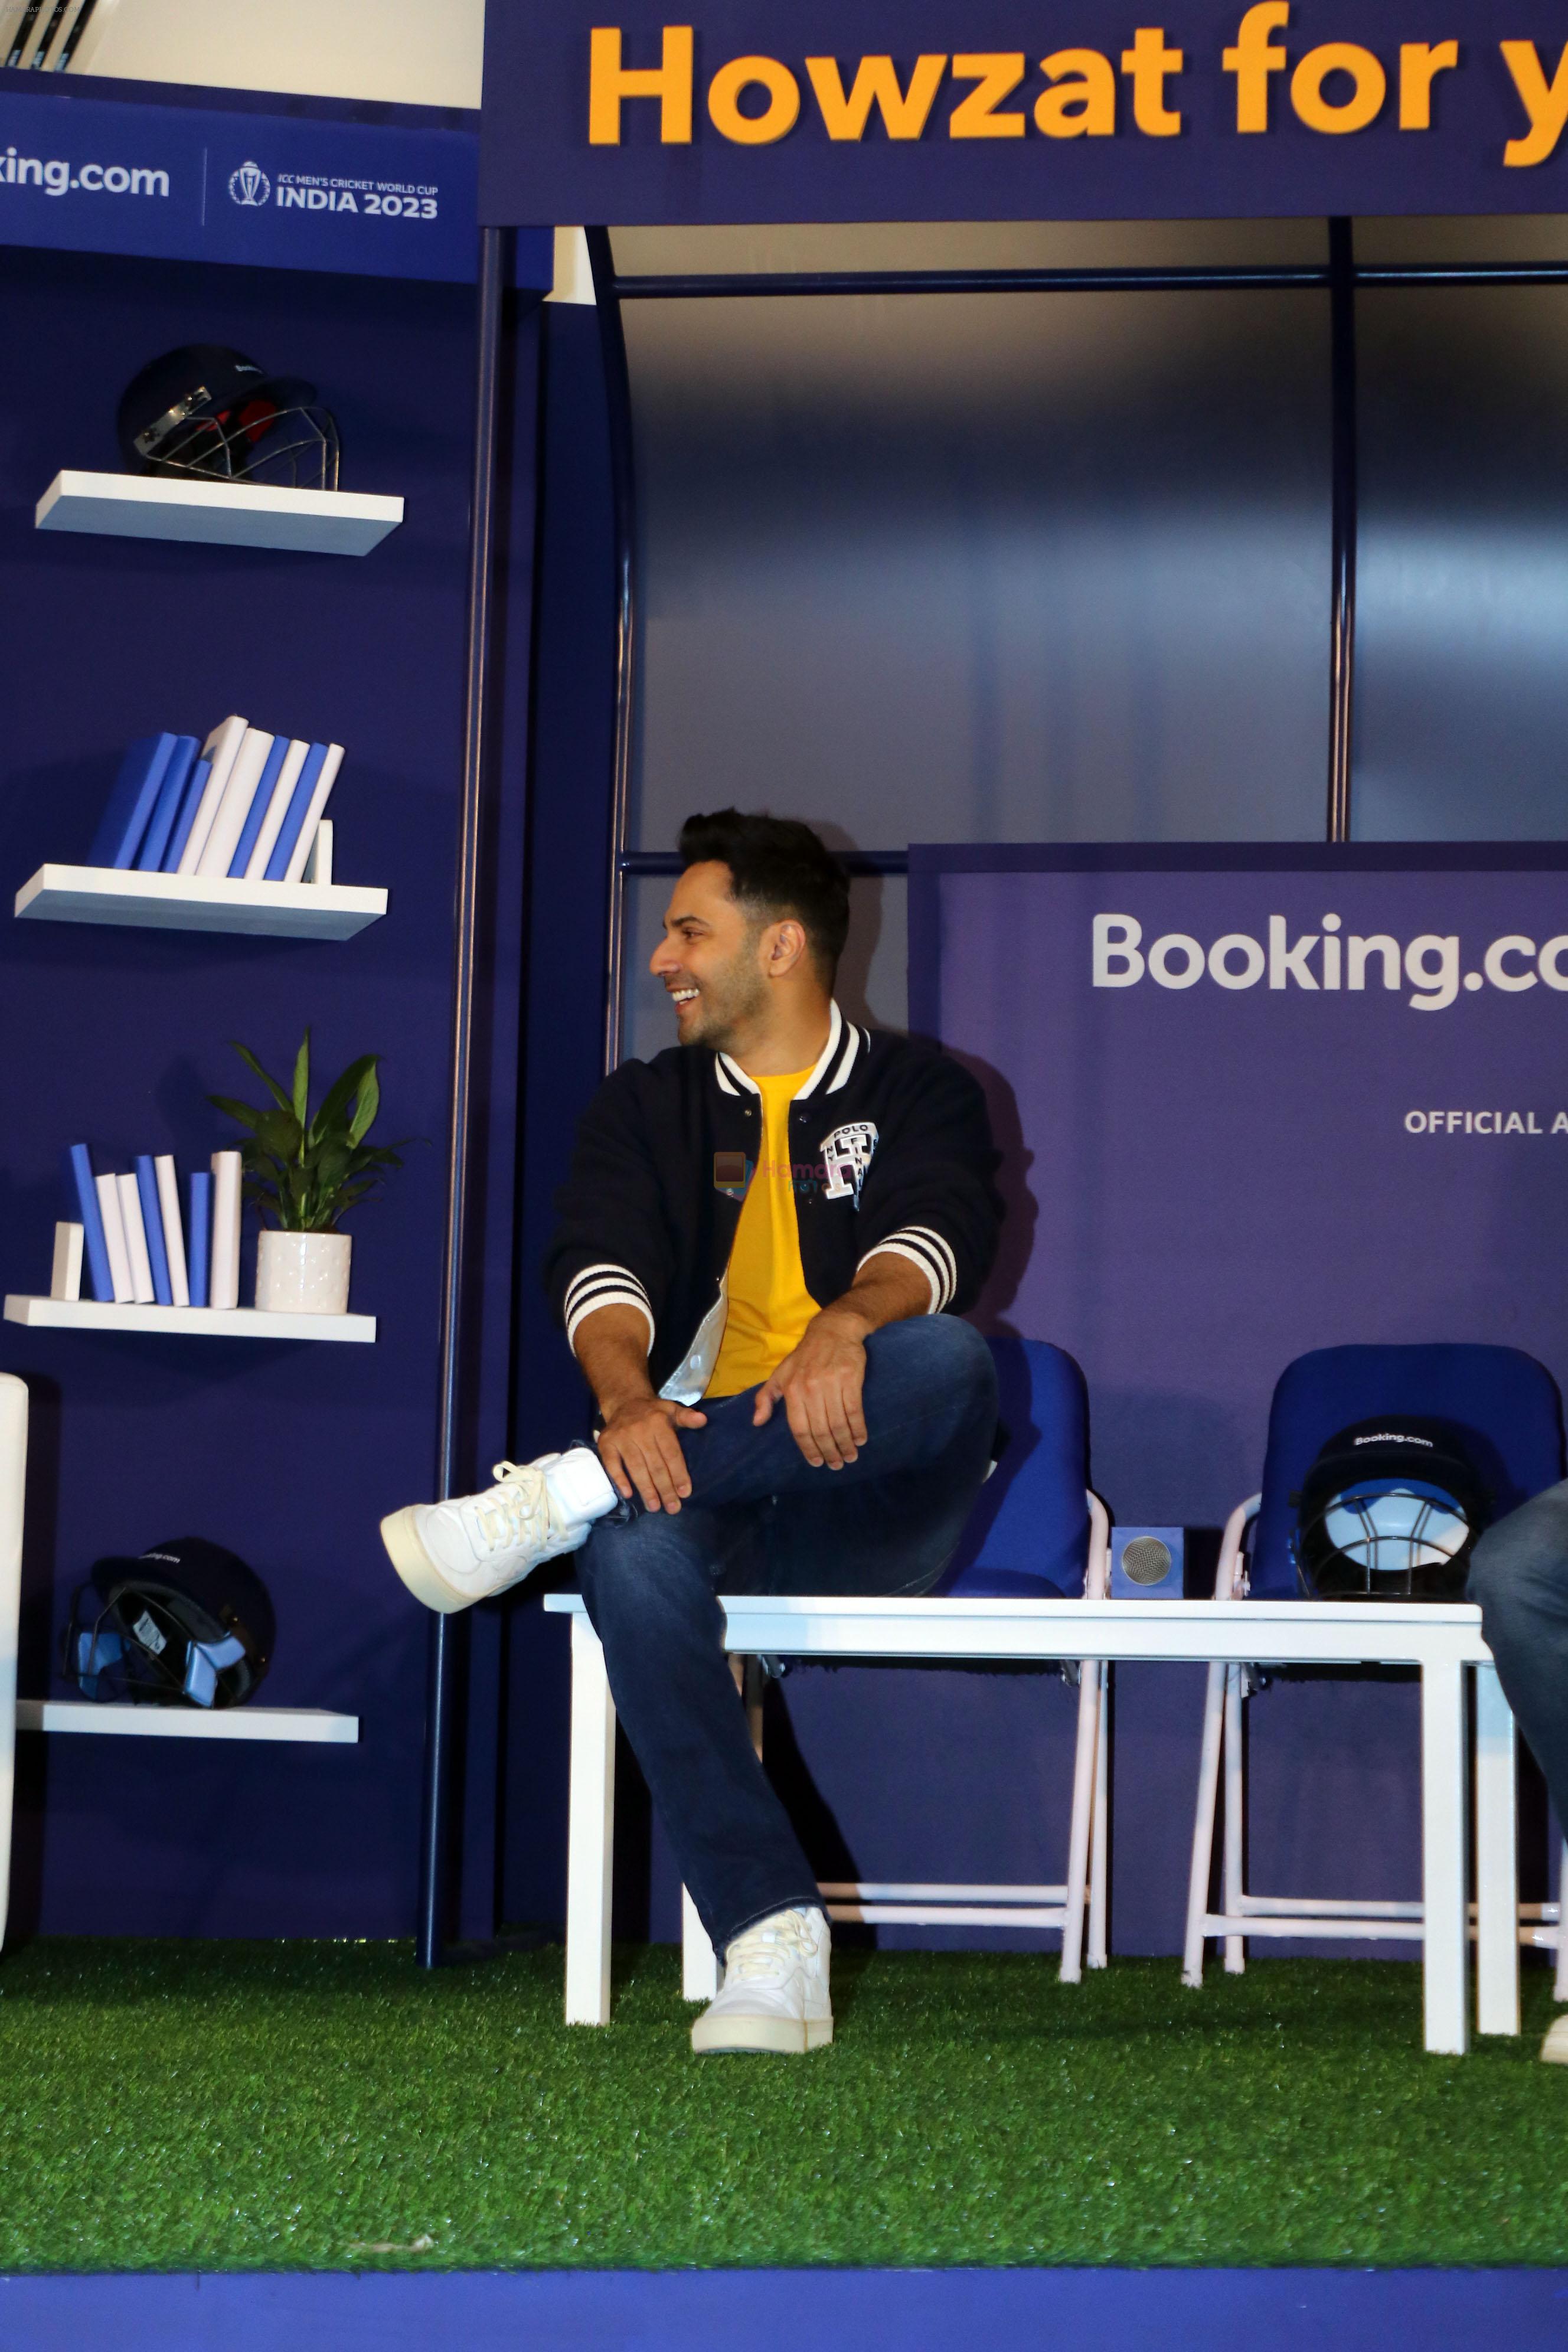 Varun Dhawan at booking.com being official accomodation partner for the ICC Men World Cup 2023 on 3rd Oct 2023